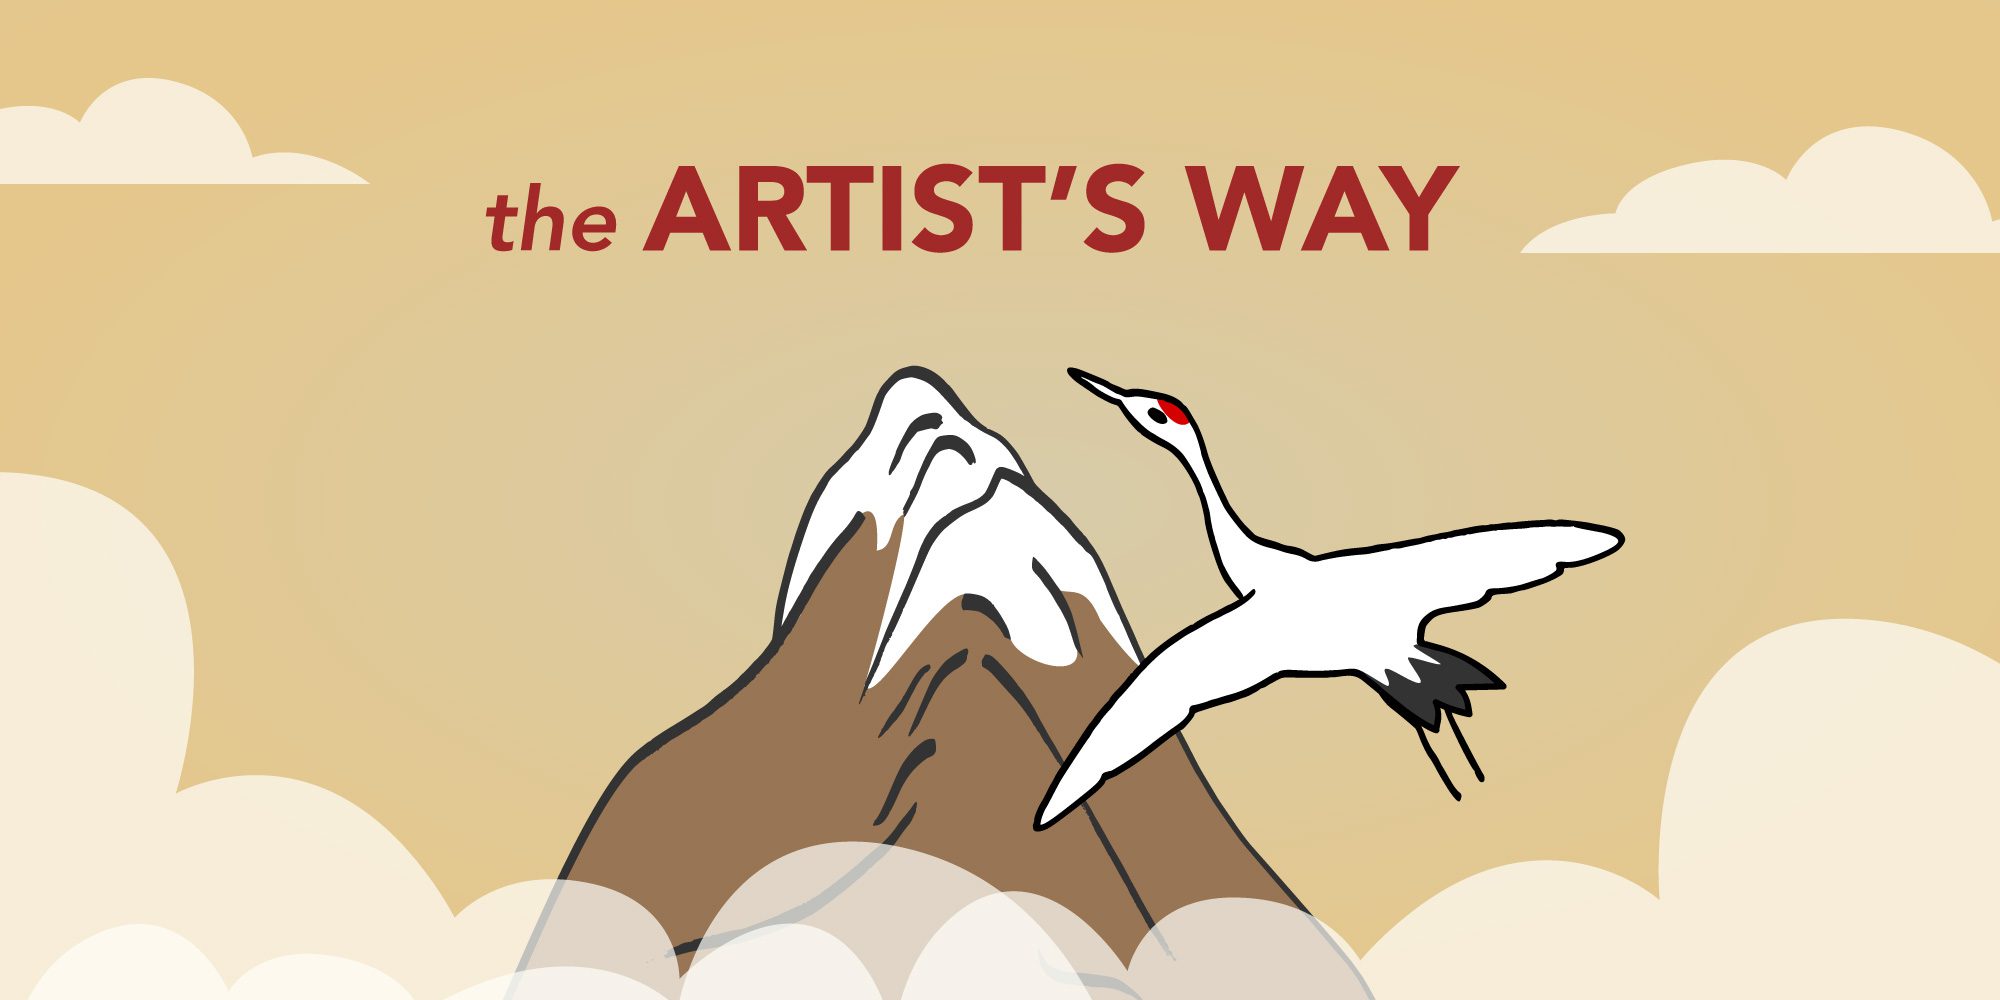 The Artist's Way Online Community Course